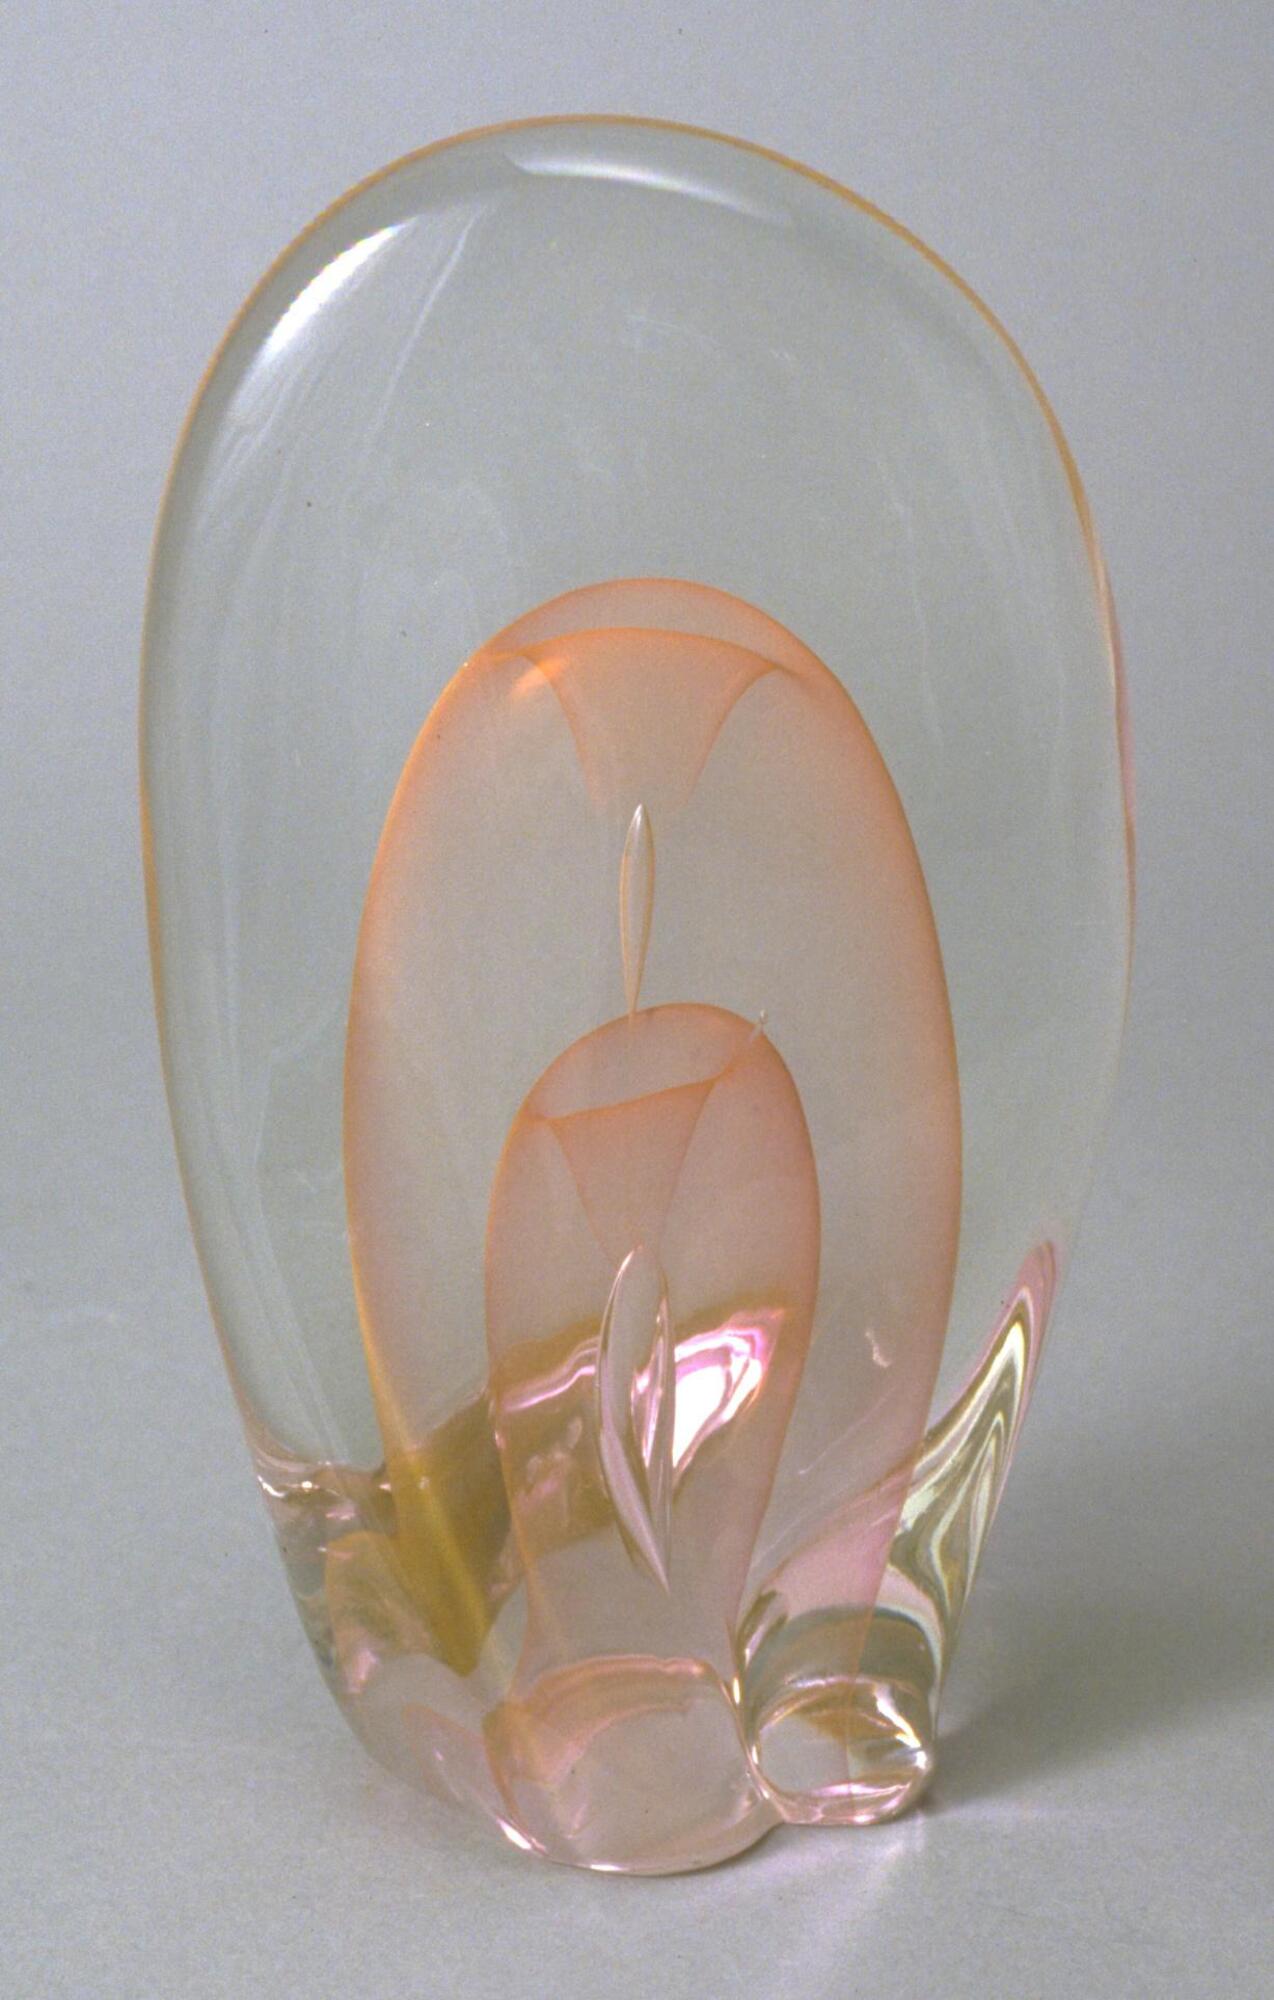 This glass sculpture is a large oval encasing a smaller pale peach oval which encases another smaller, darker peach oval like bubbles within bubbles. 